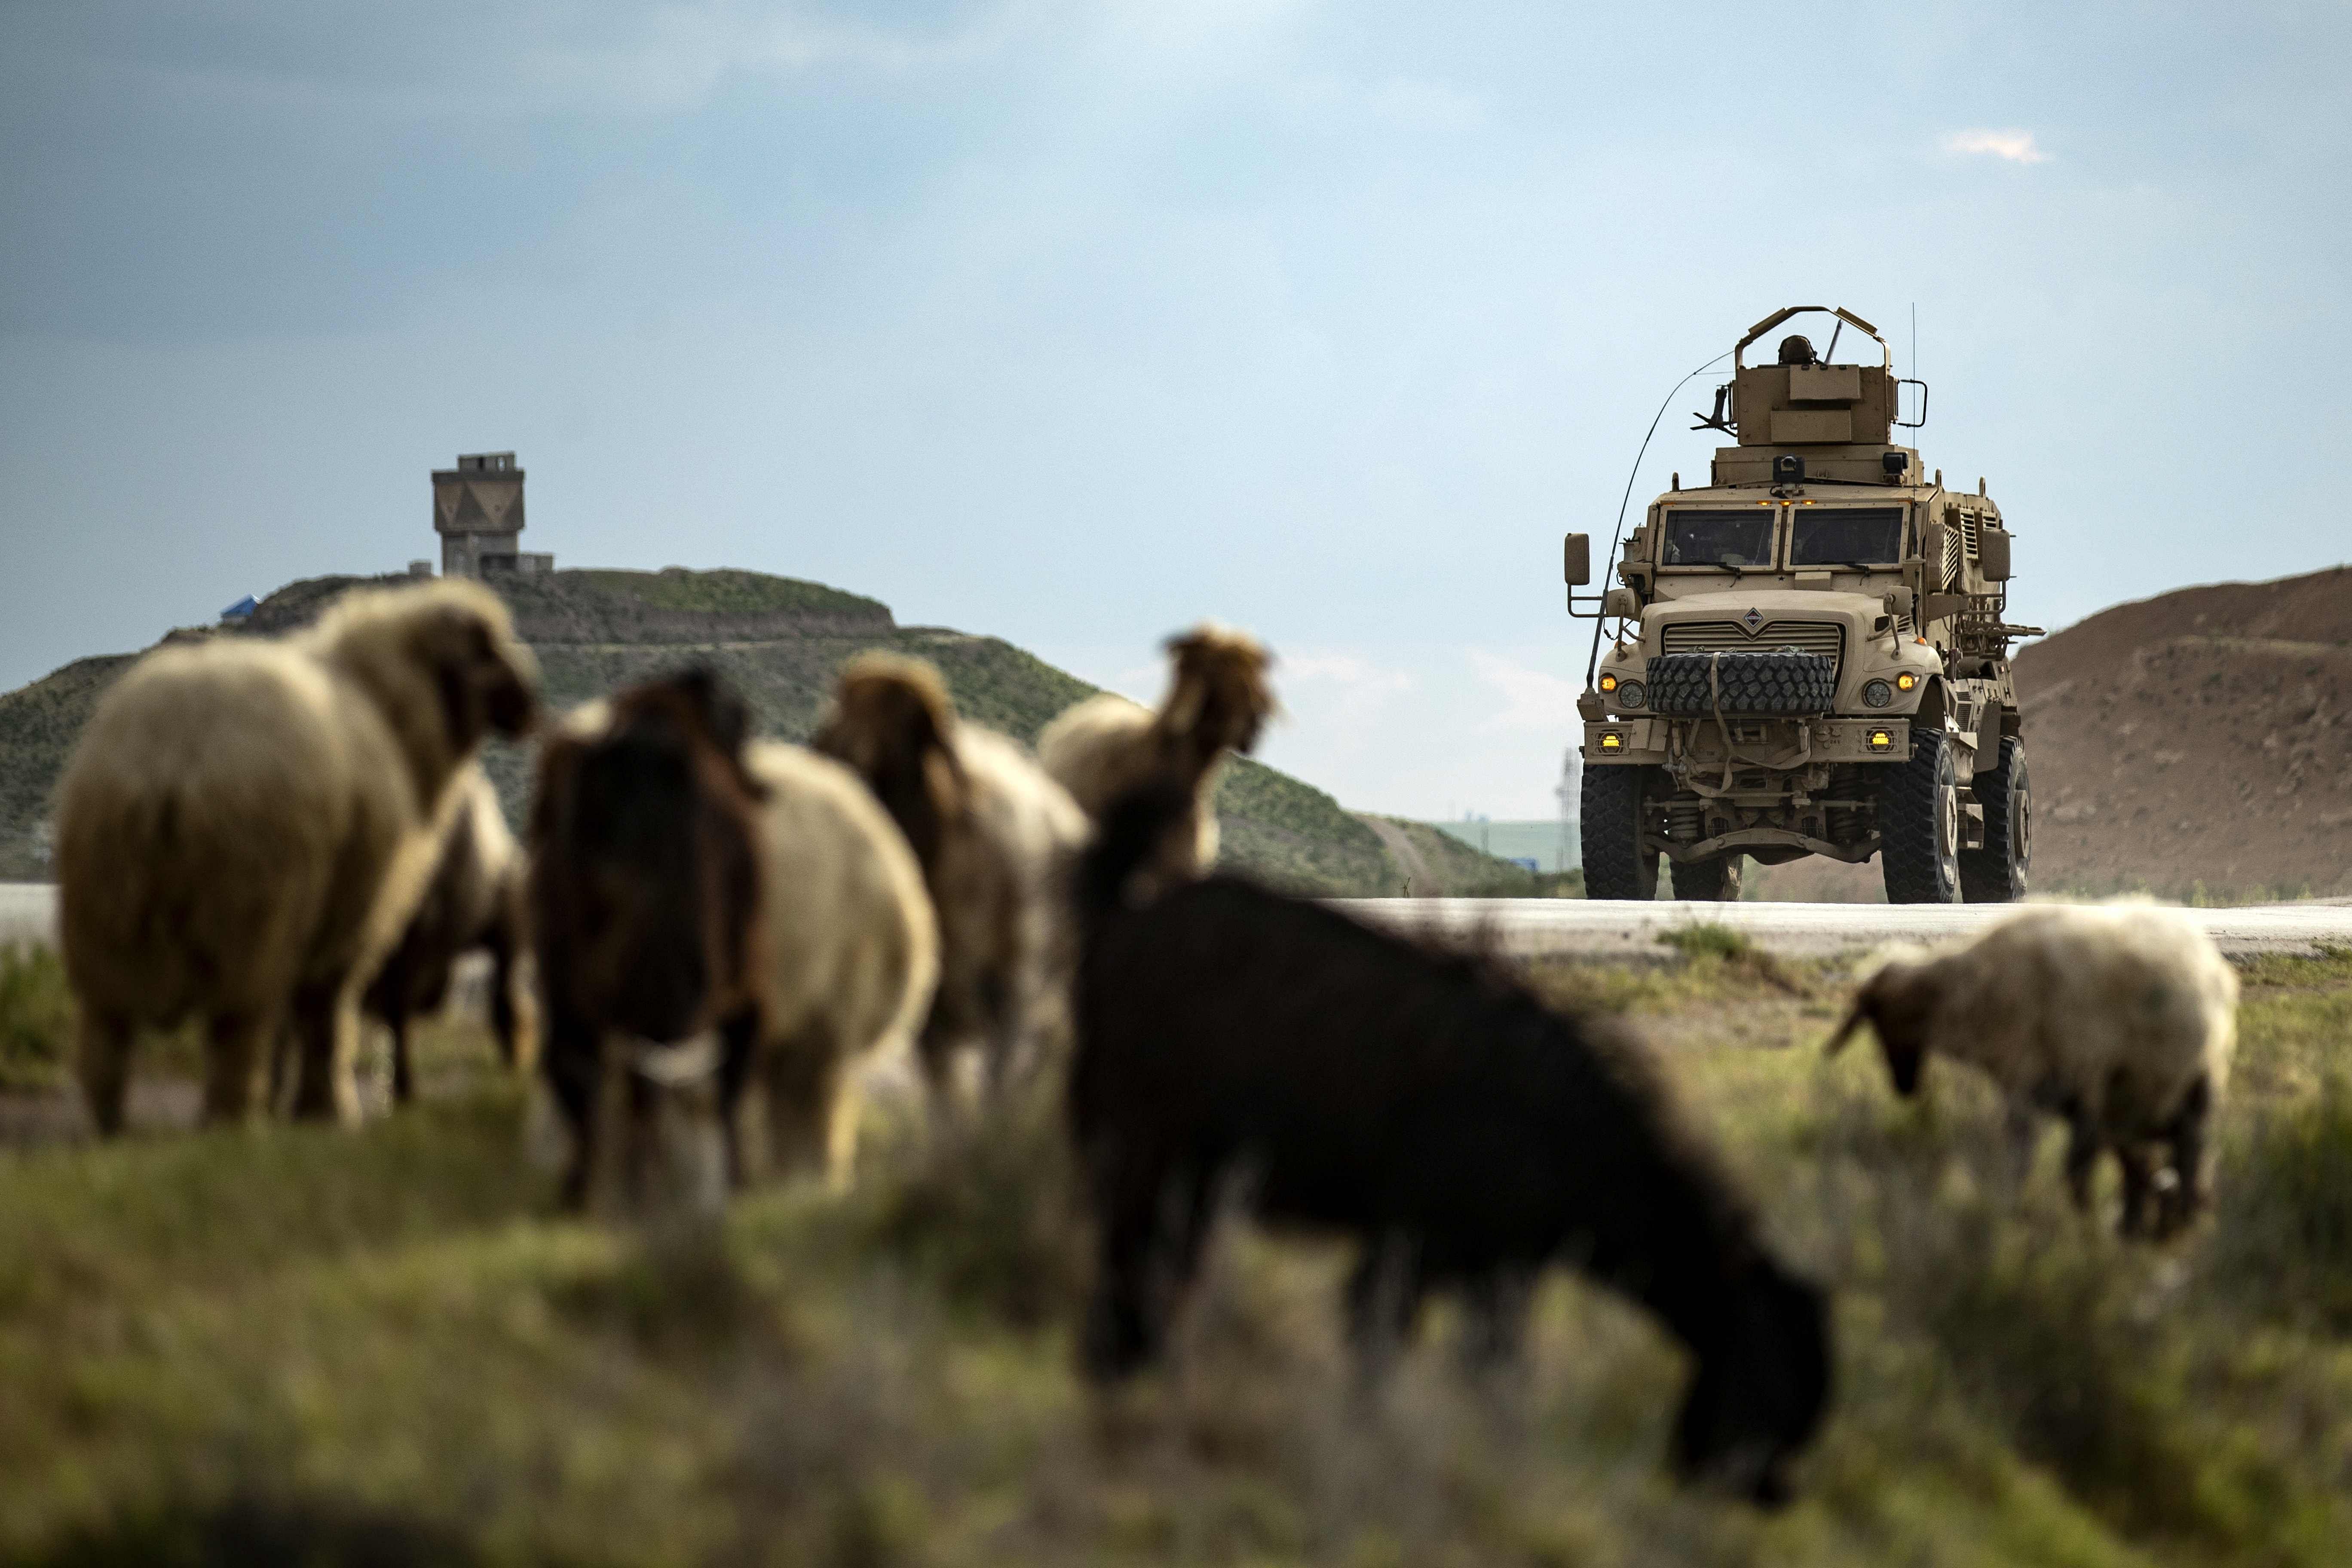 A US military vehicle advances past a herd of sheep/ Representative image (Credit: AFP)